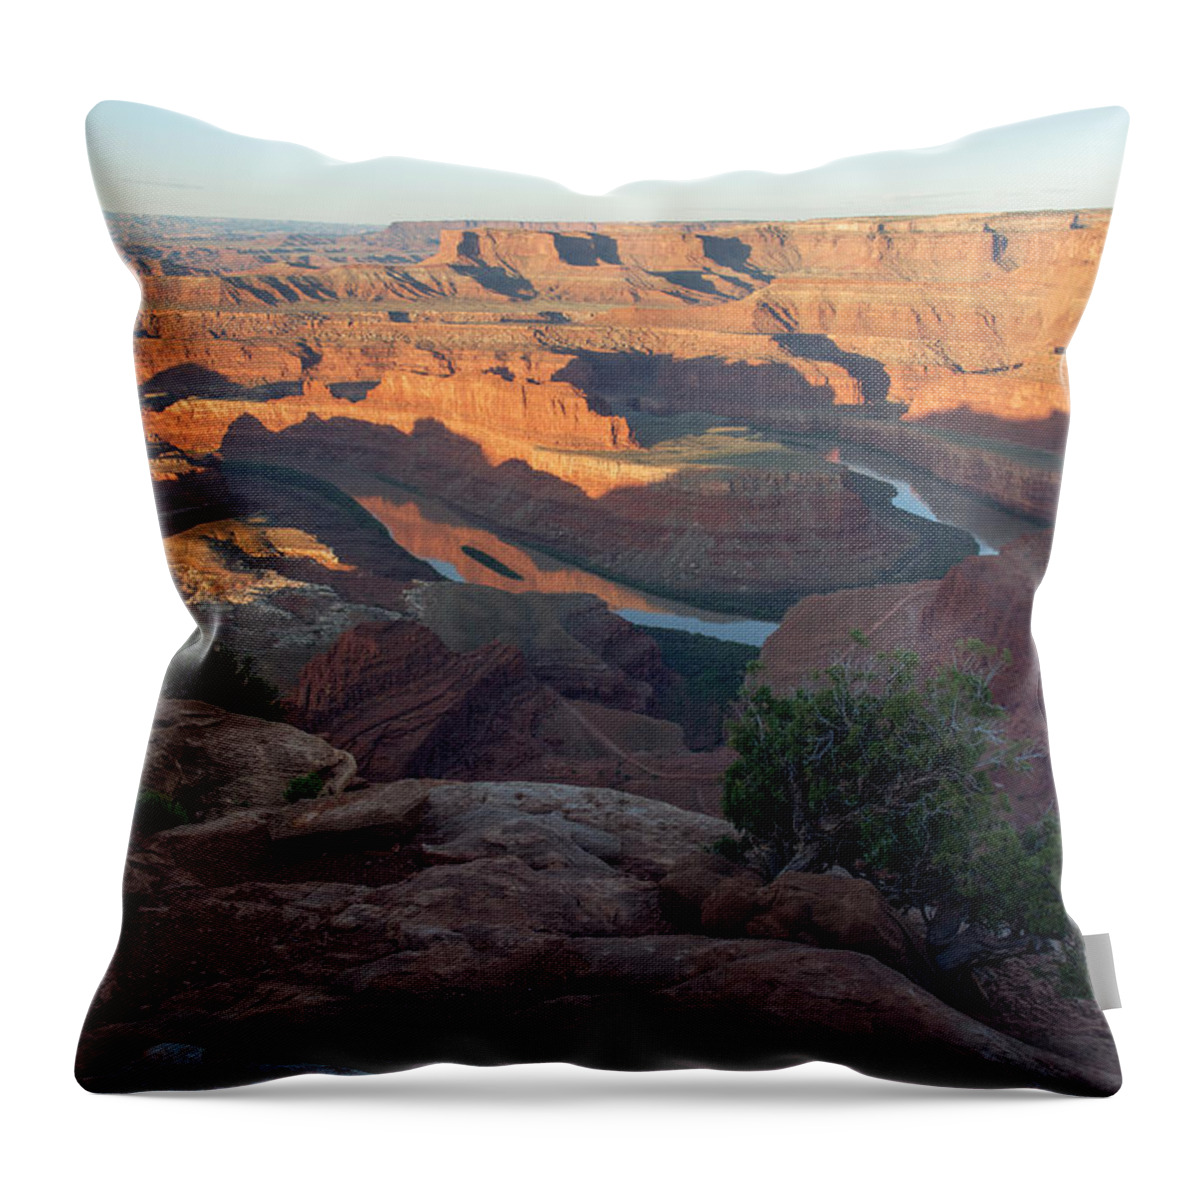 Utah Throw Pillow featuring the photograph Canyon Sunrise by Aaron Spong